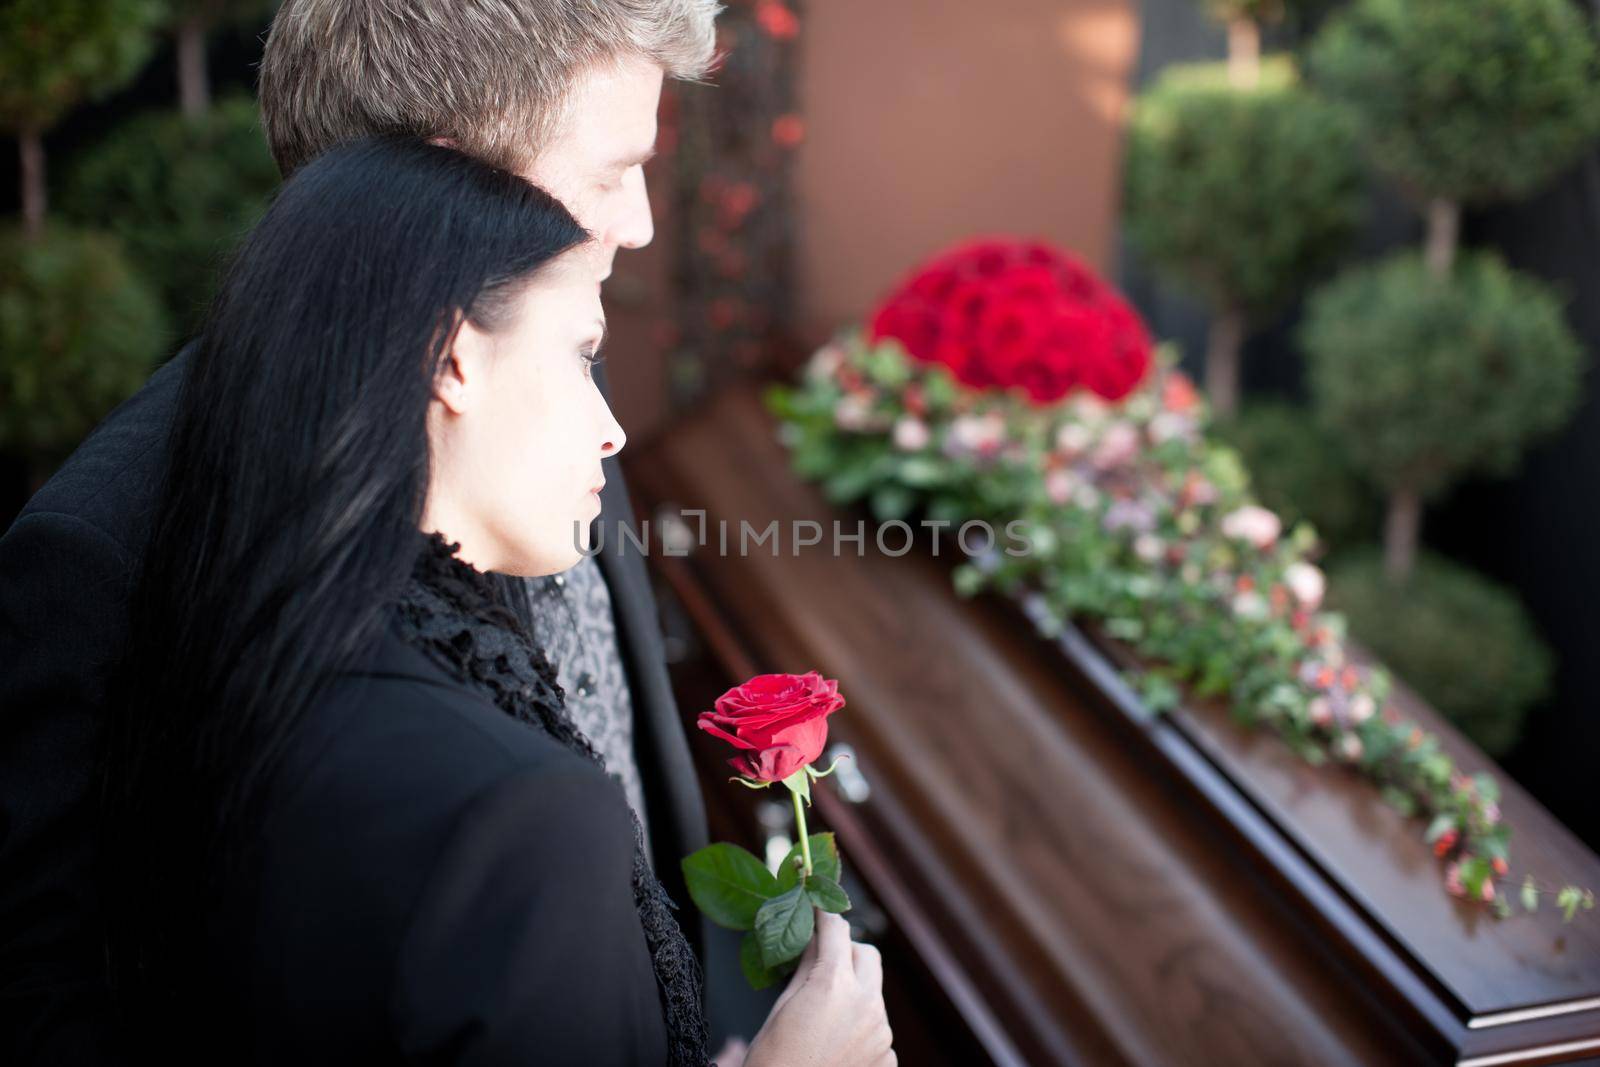 People at Funeral with coffin by Kzenon